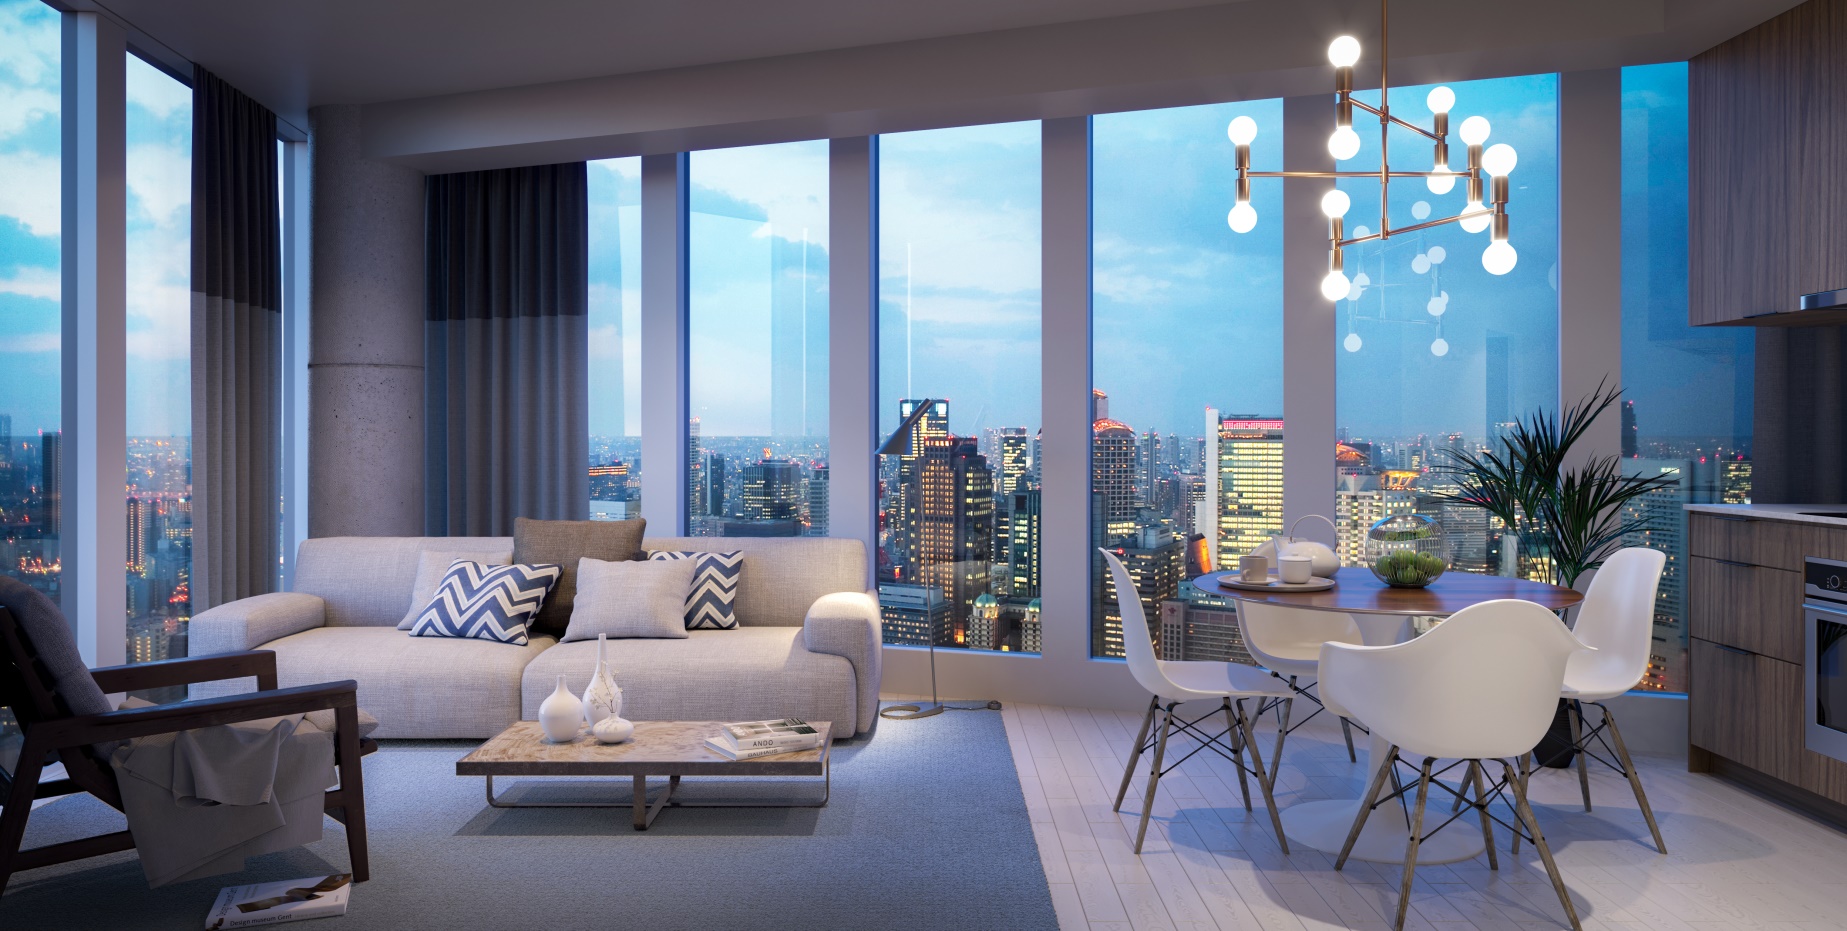 Festival Condos by Menkes and QuadReal - The Zadegan Group